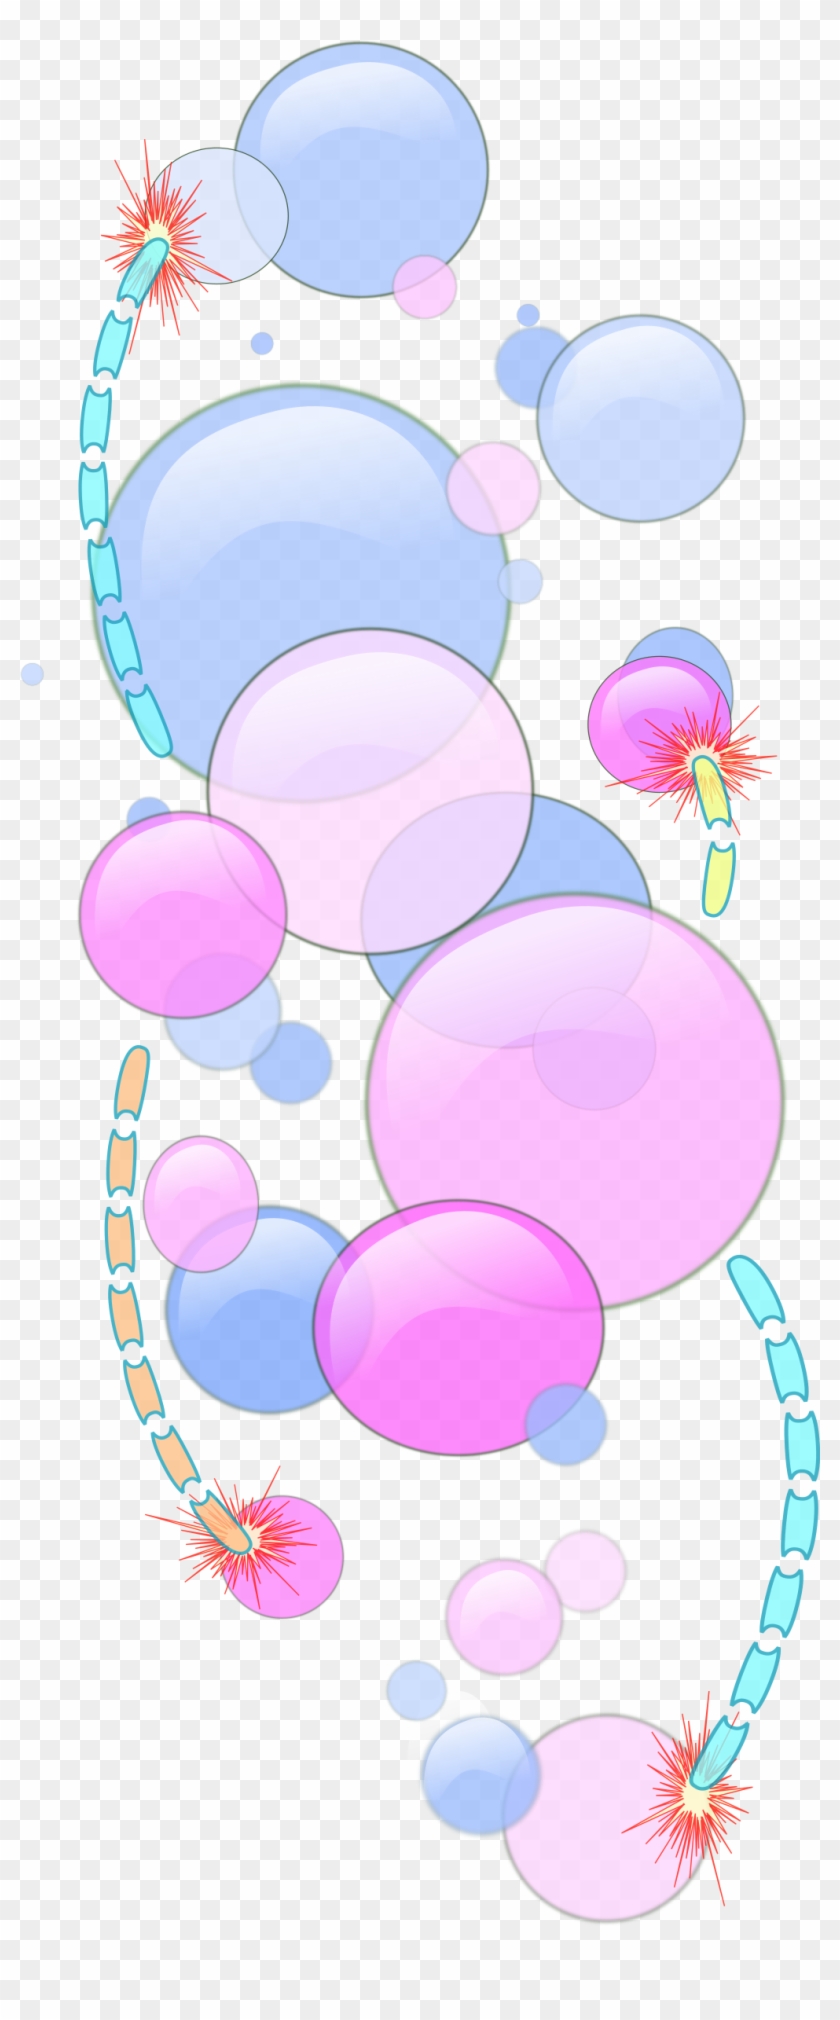 This Free Icons Png Design Of Bubbles And Worms - فقاعات كرتون Clipart #4210221